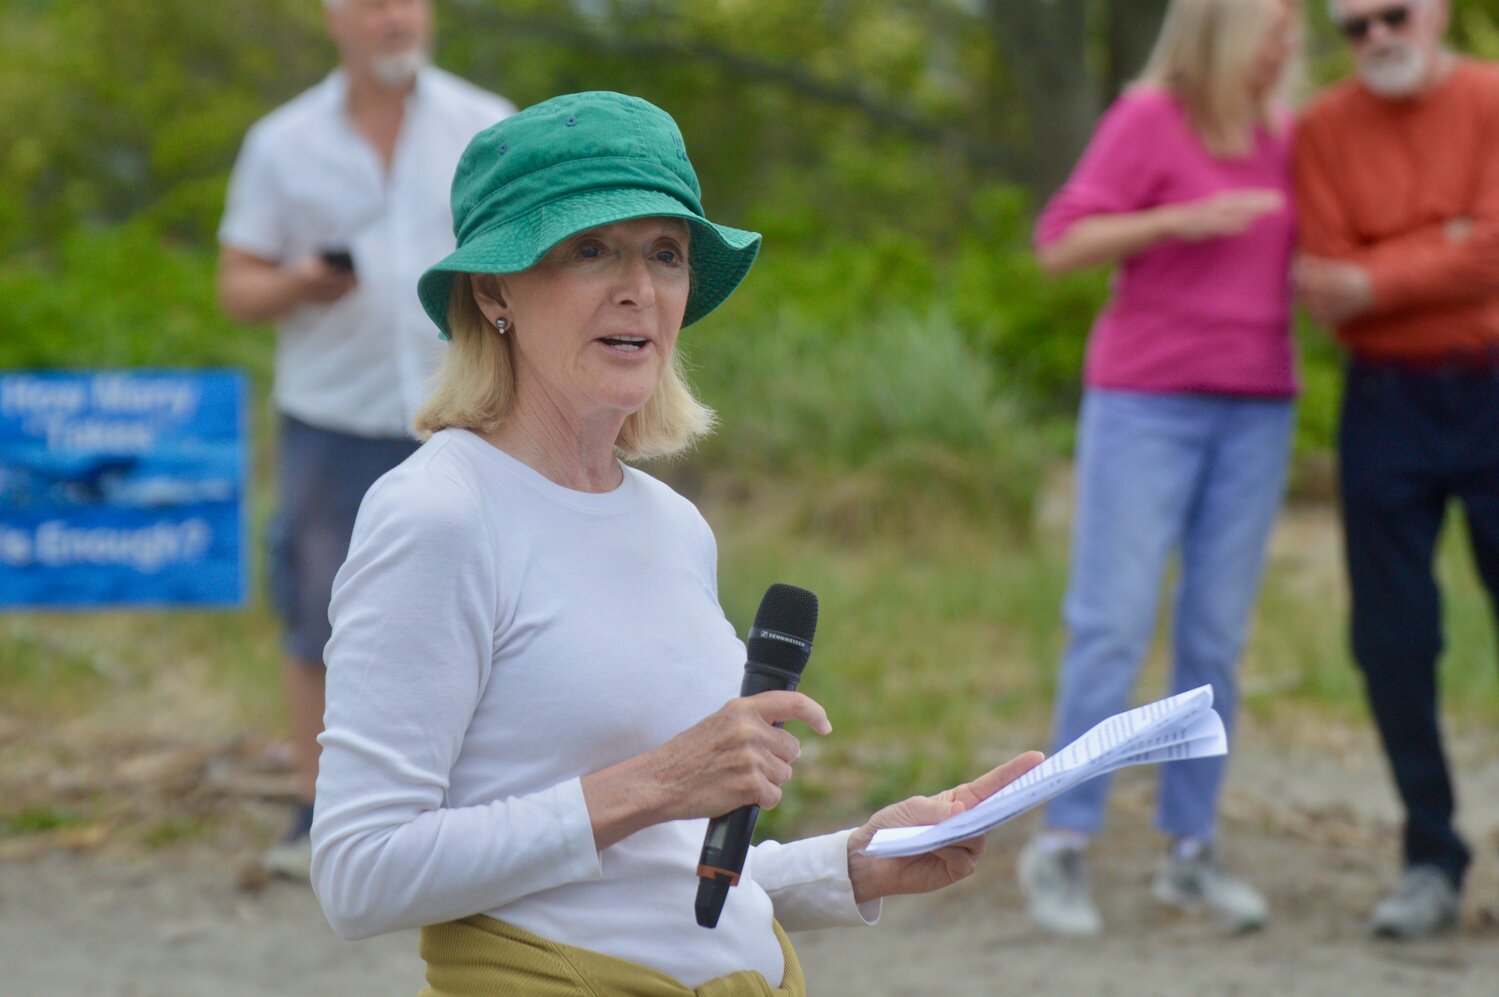 Constance Gee of Westport spoke mainly about the detrimental impact she believed SouthCoast Wind’s project will have on marine life. “A deafened whale … in a shipping channel is likely a dead whale,” she said.